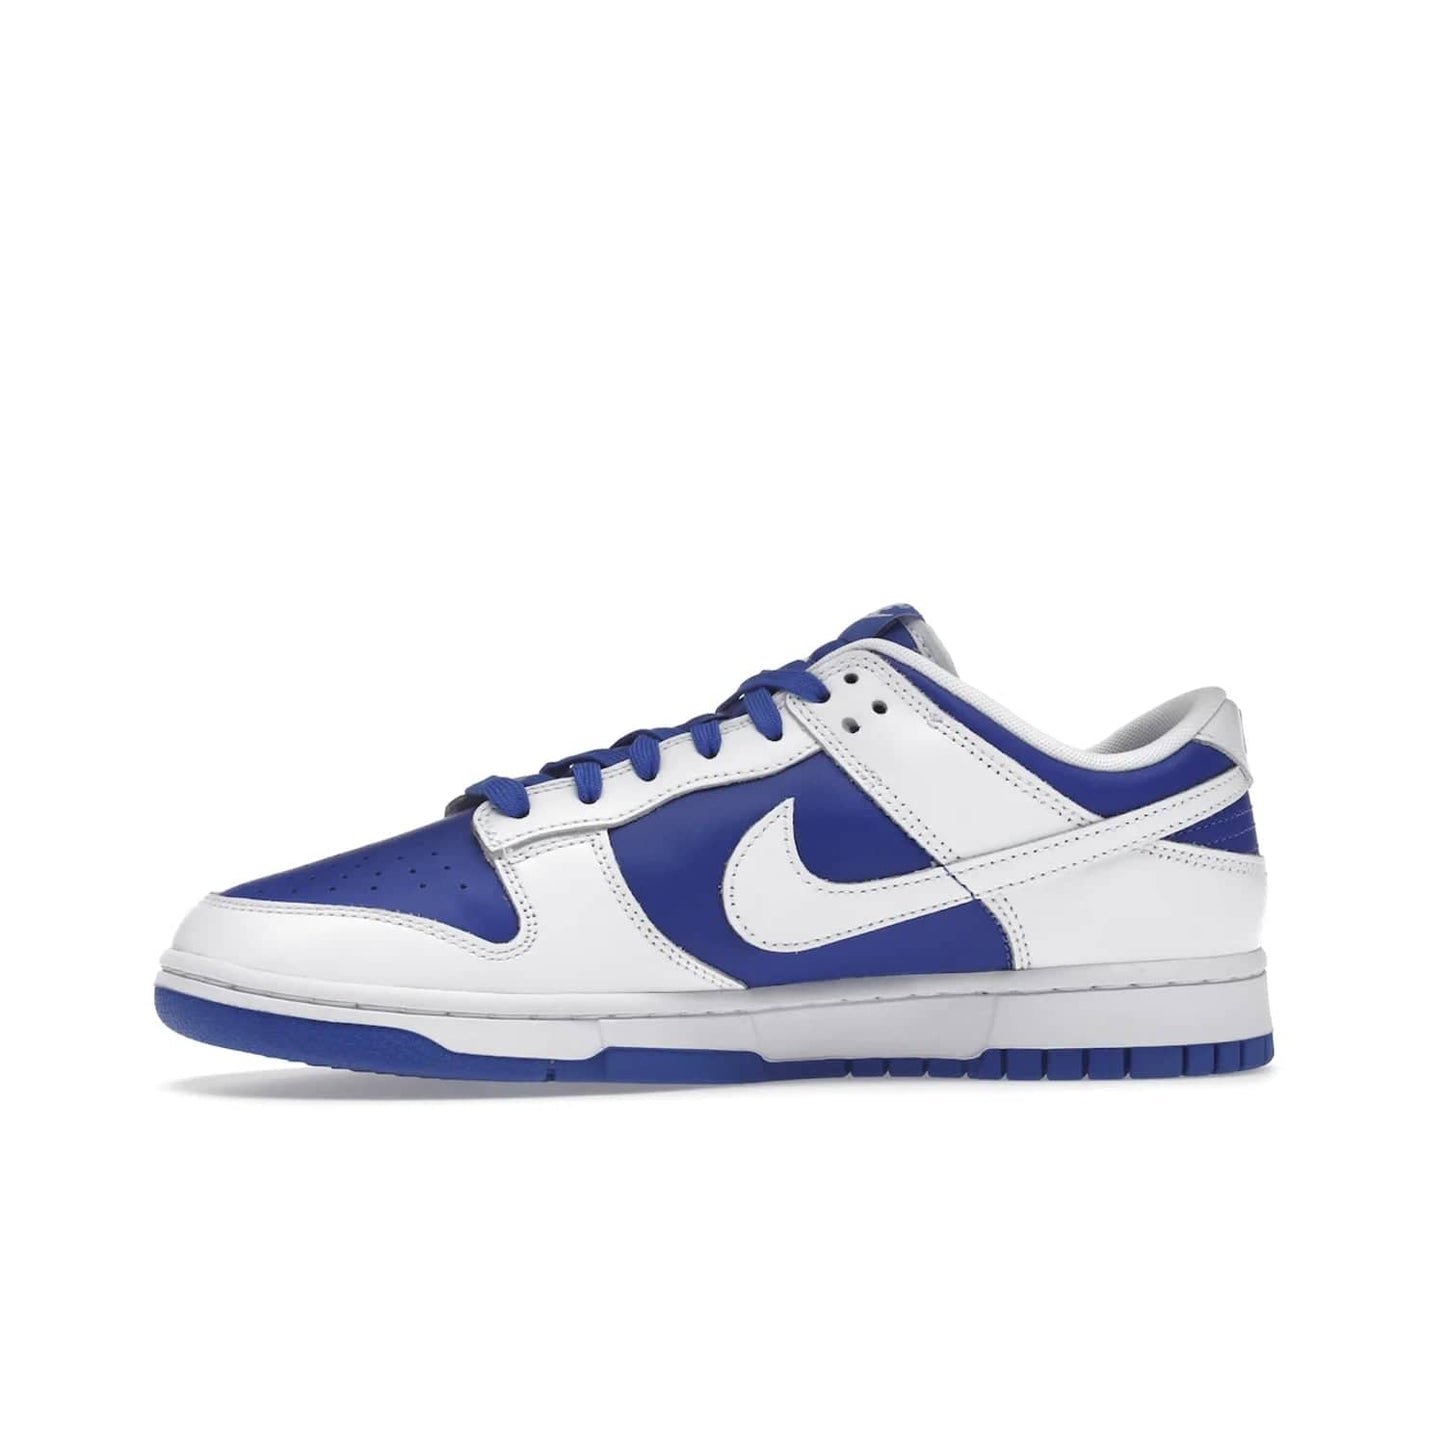 Nike Dunk Low Racer Blue White - Image 18 - Only at www.BallersClubKickz.com - Sleek Racer Blue leather upper and white leather overlays make up the Nike Dunk Low Racer Blue White. Woven tag and heel embroidery for a 1985 Dunk look with a matching EVA foam sole completes the classic colorway.